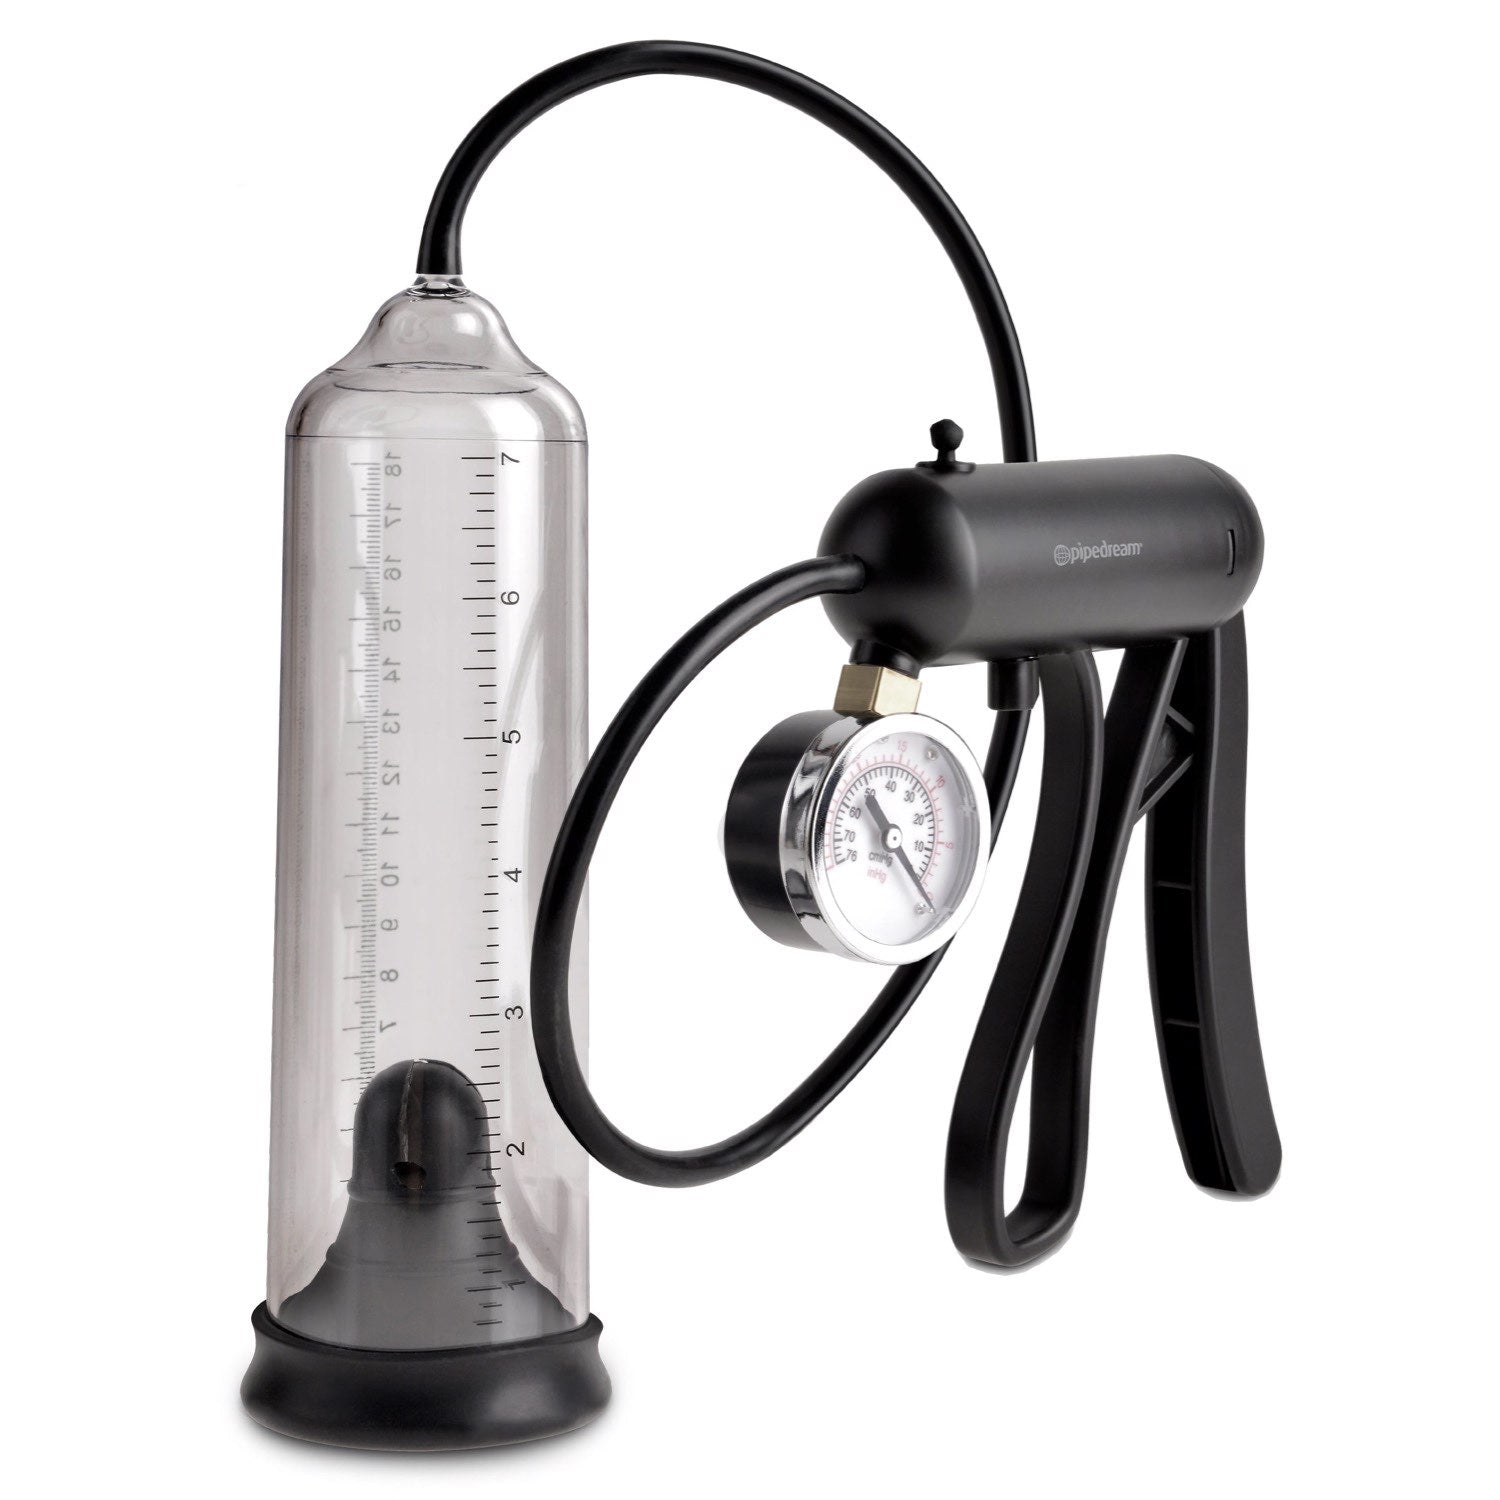 Pump Worx Pro-Gauge Power Pump - Clear Penis Pump with Hand Trigger by Pipedream